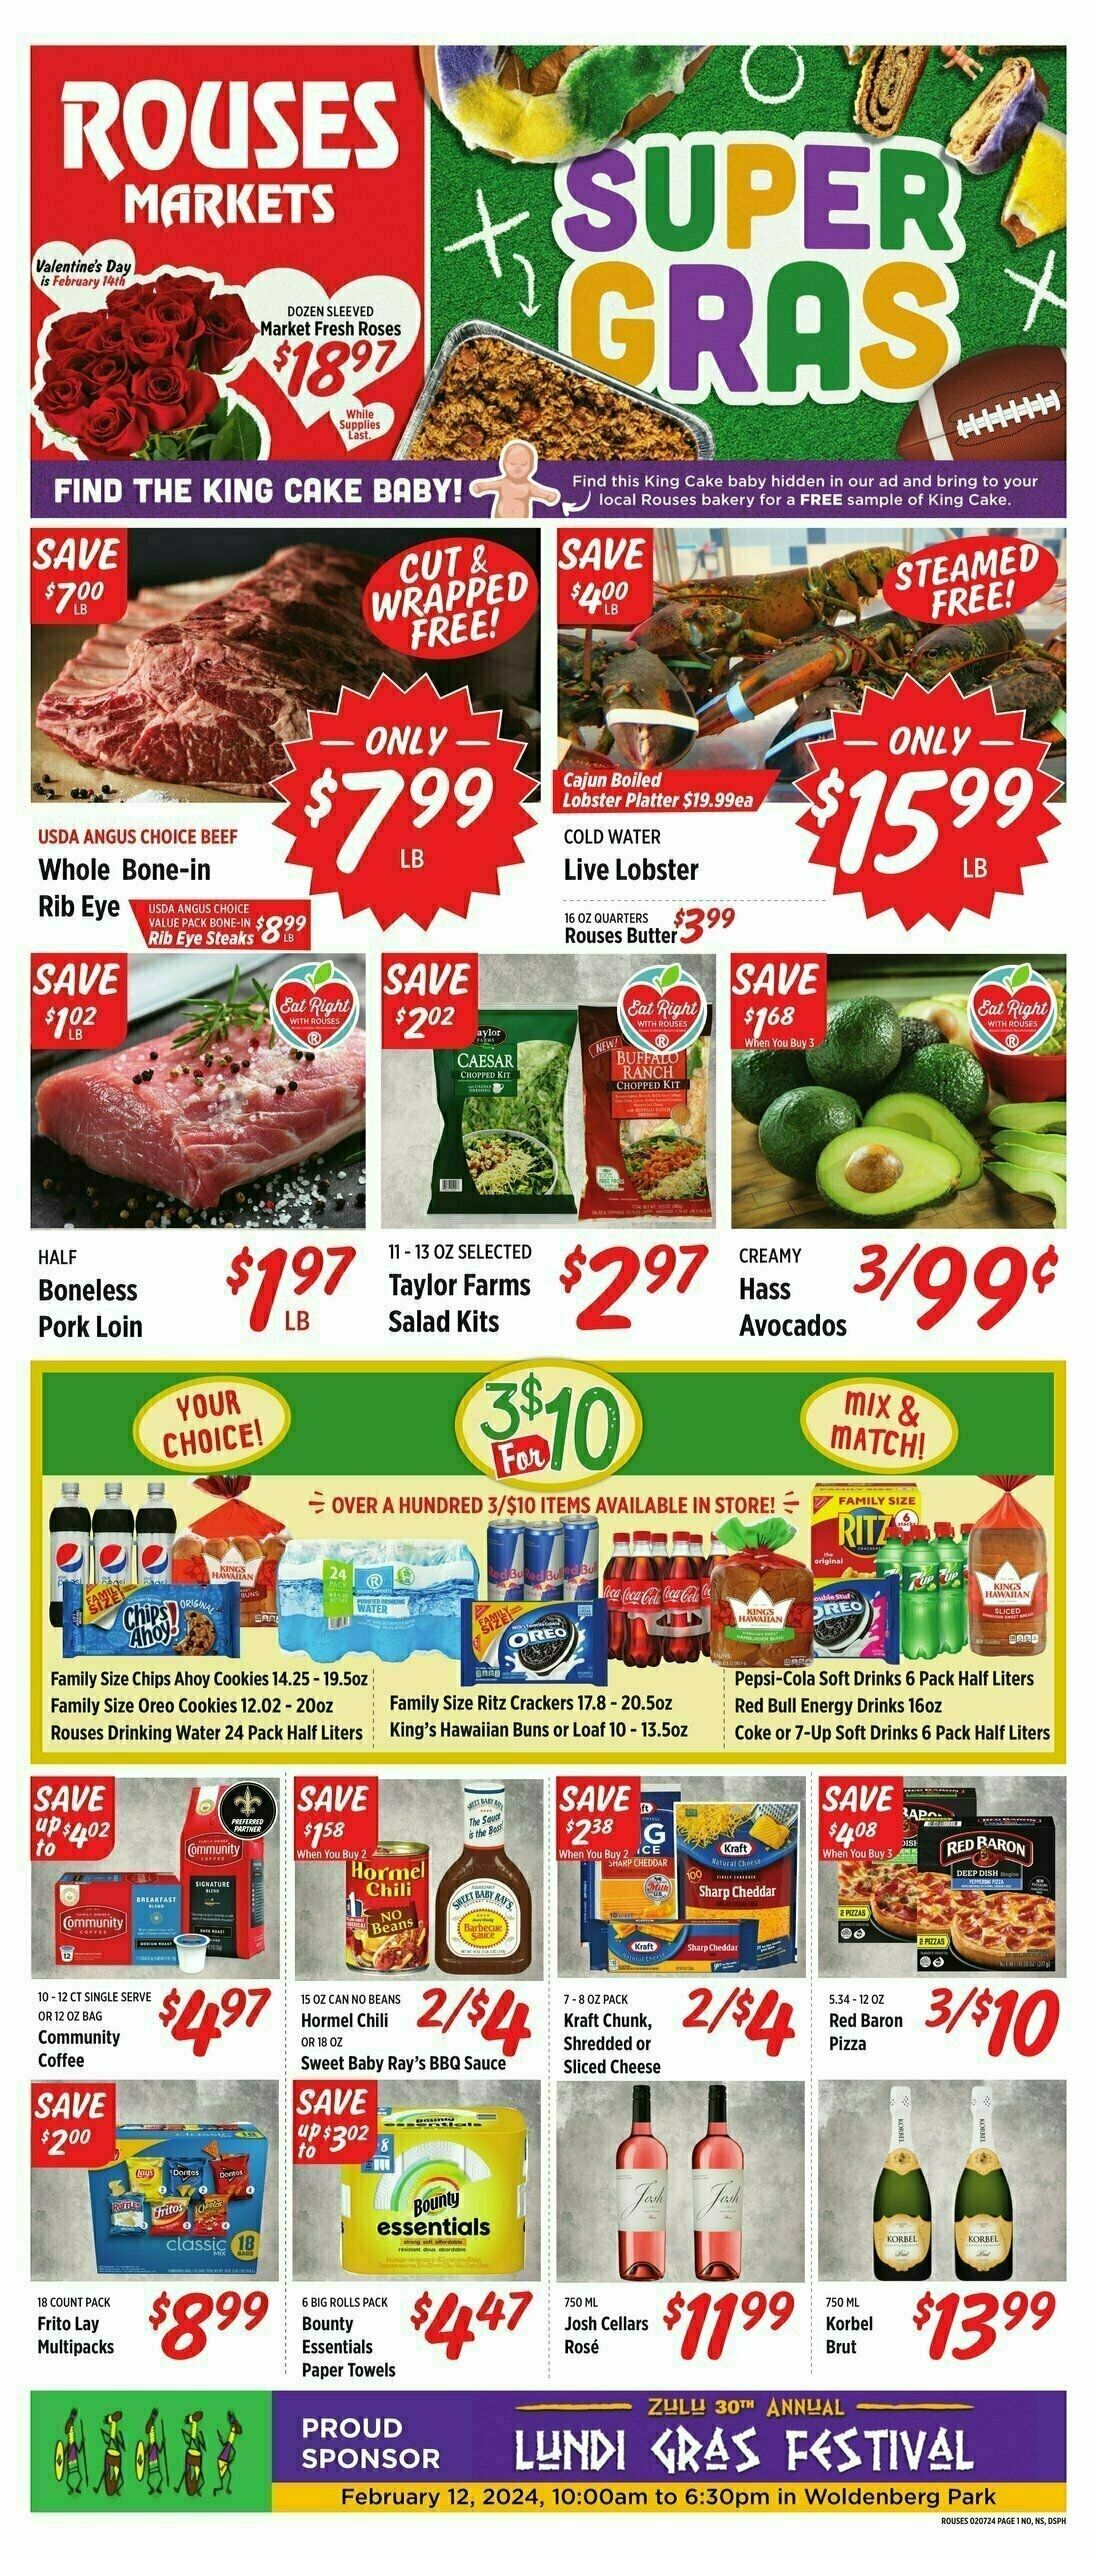 Rouses Markets Weekly Ad from February 7